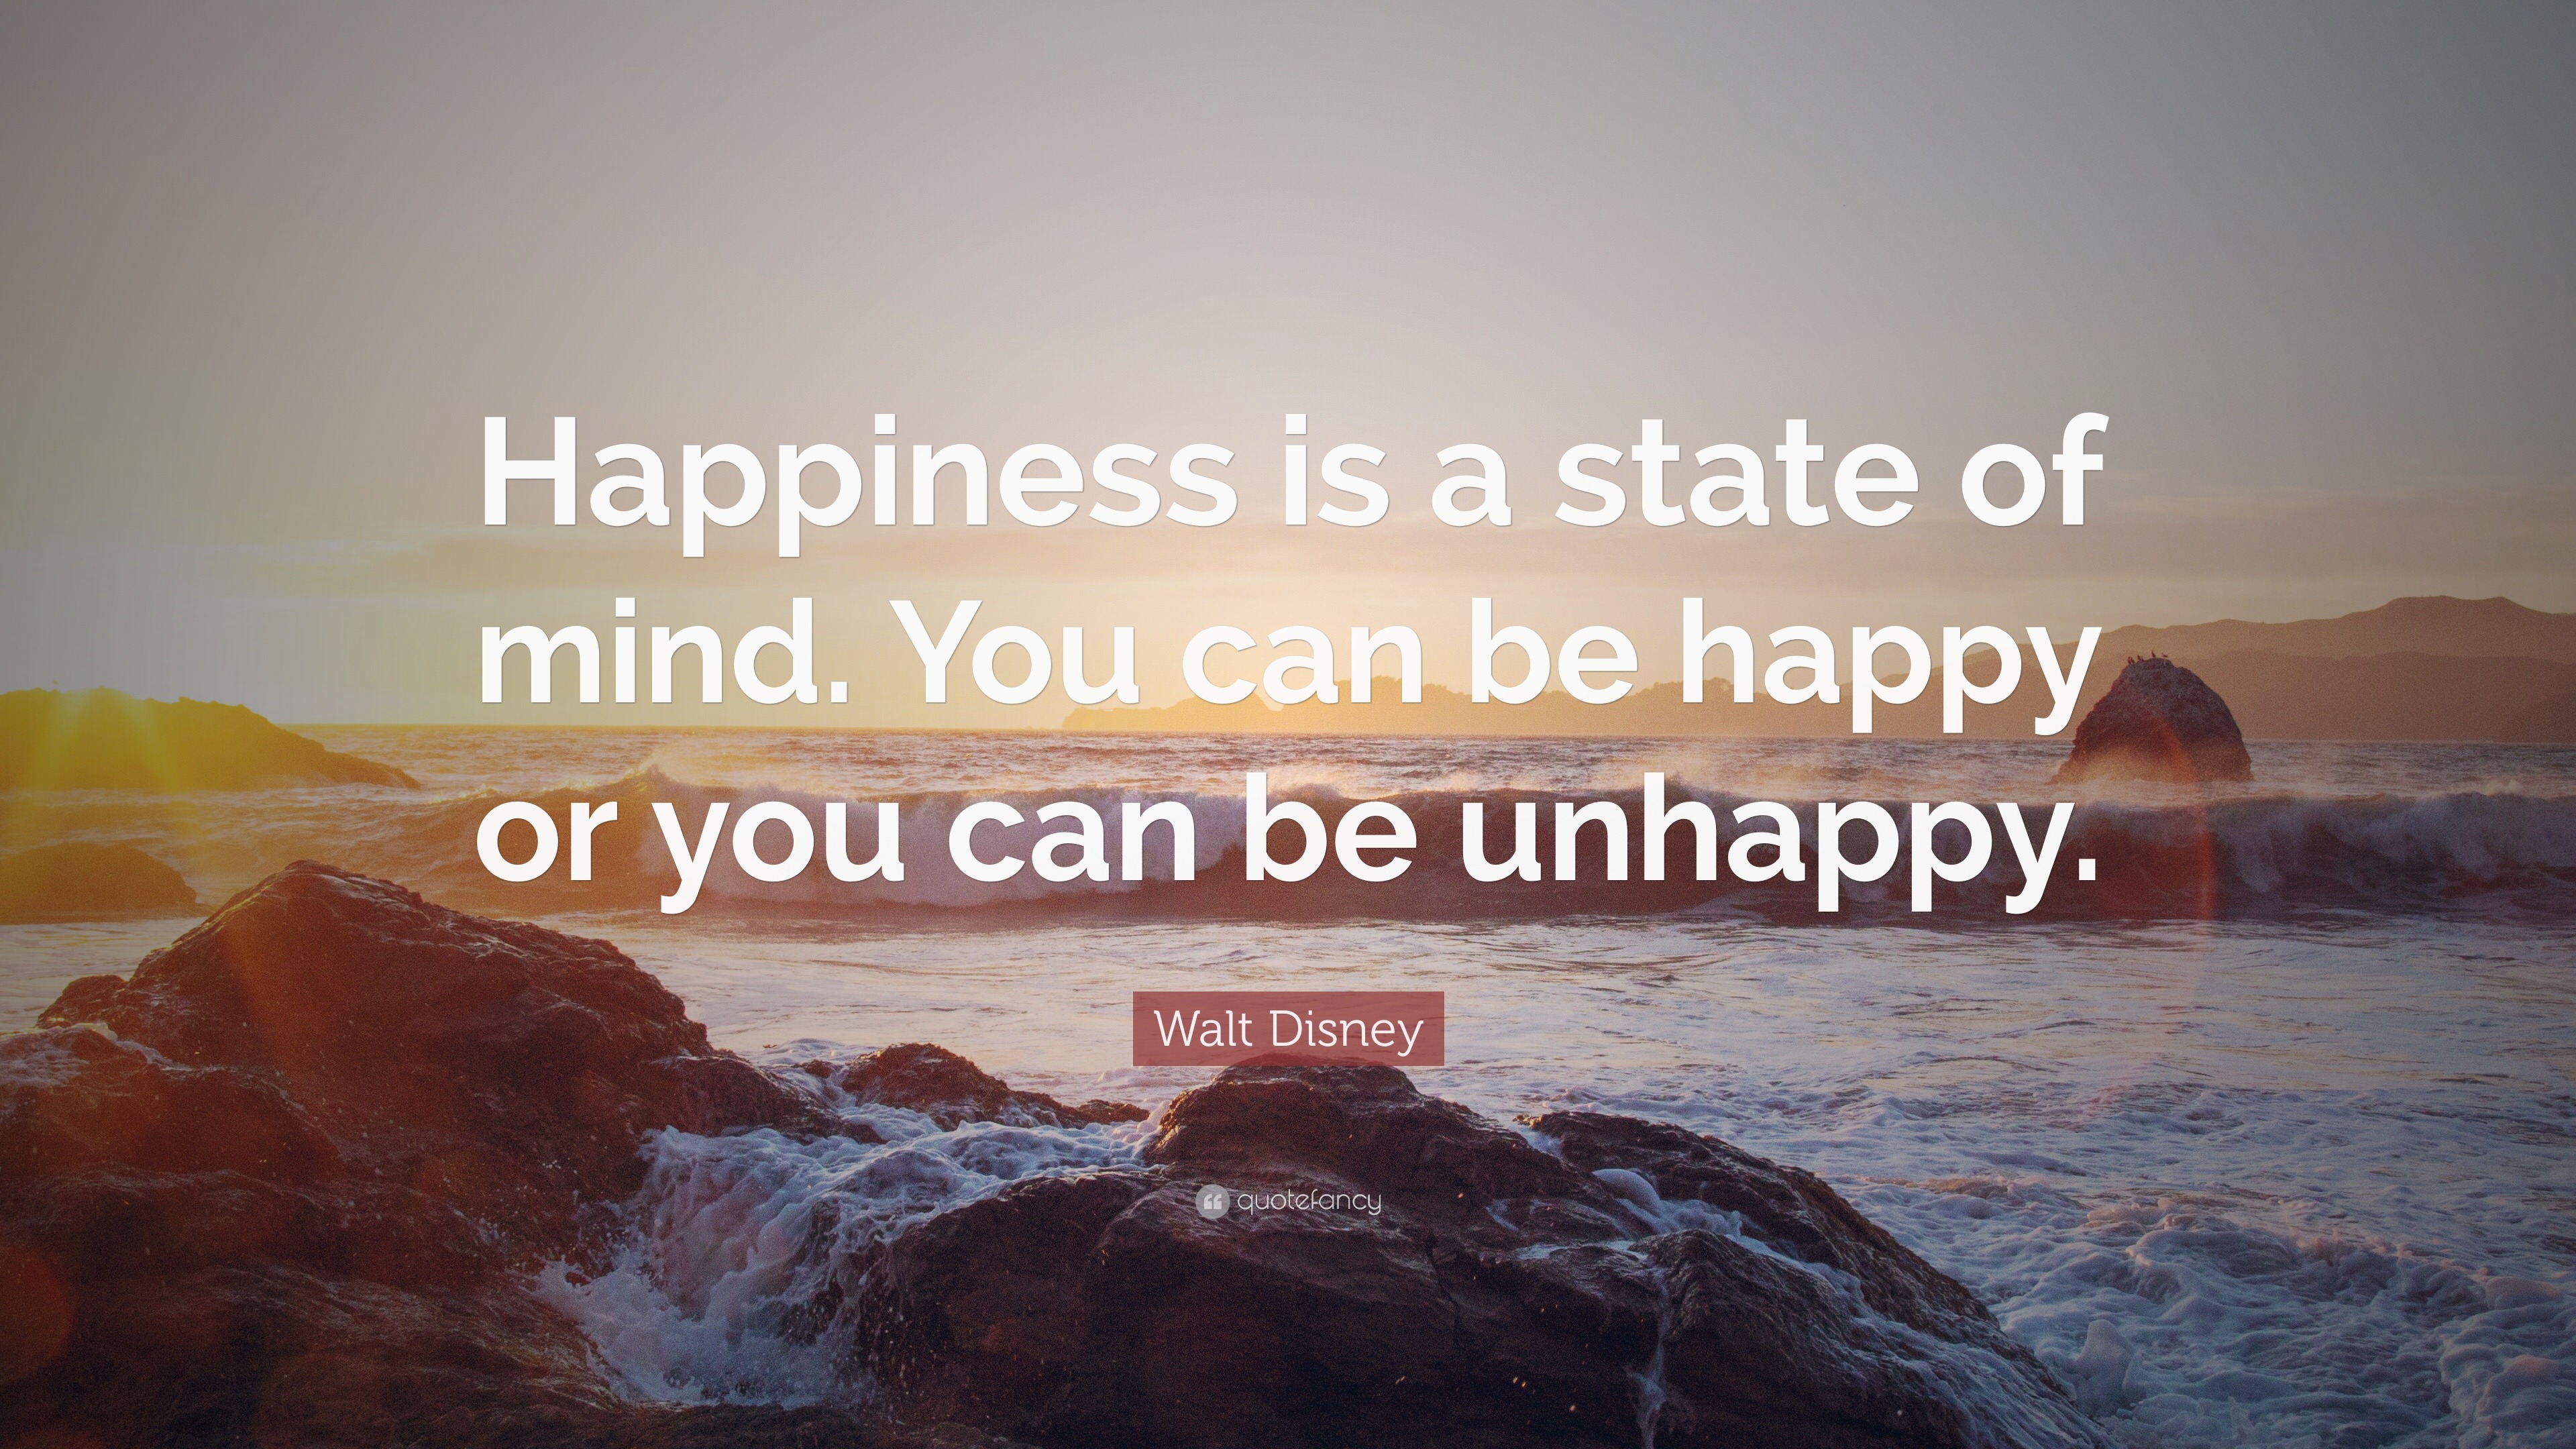 Walt Disney Quote: “Happiness is a state of mind. You can be happy or